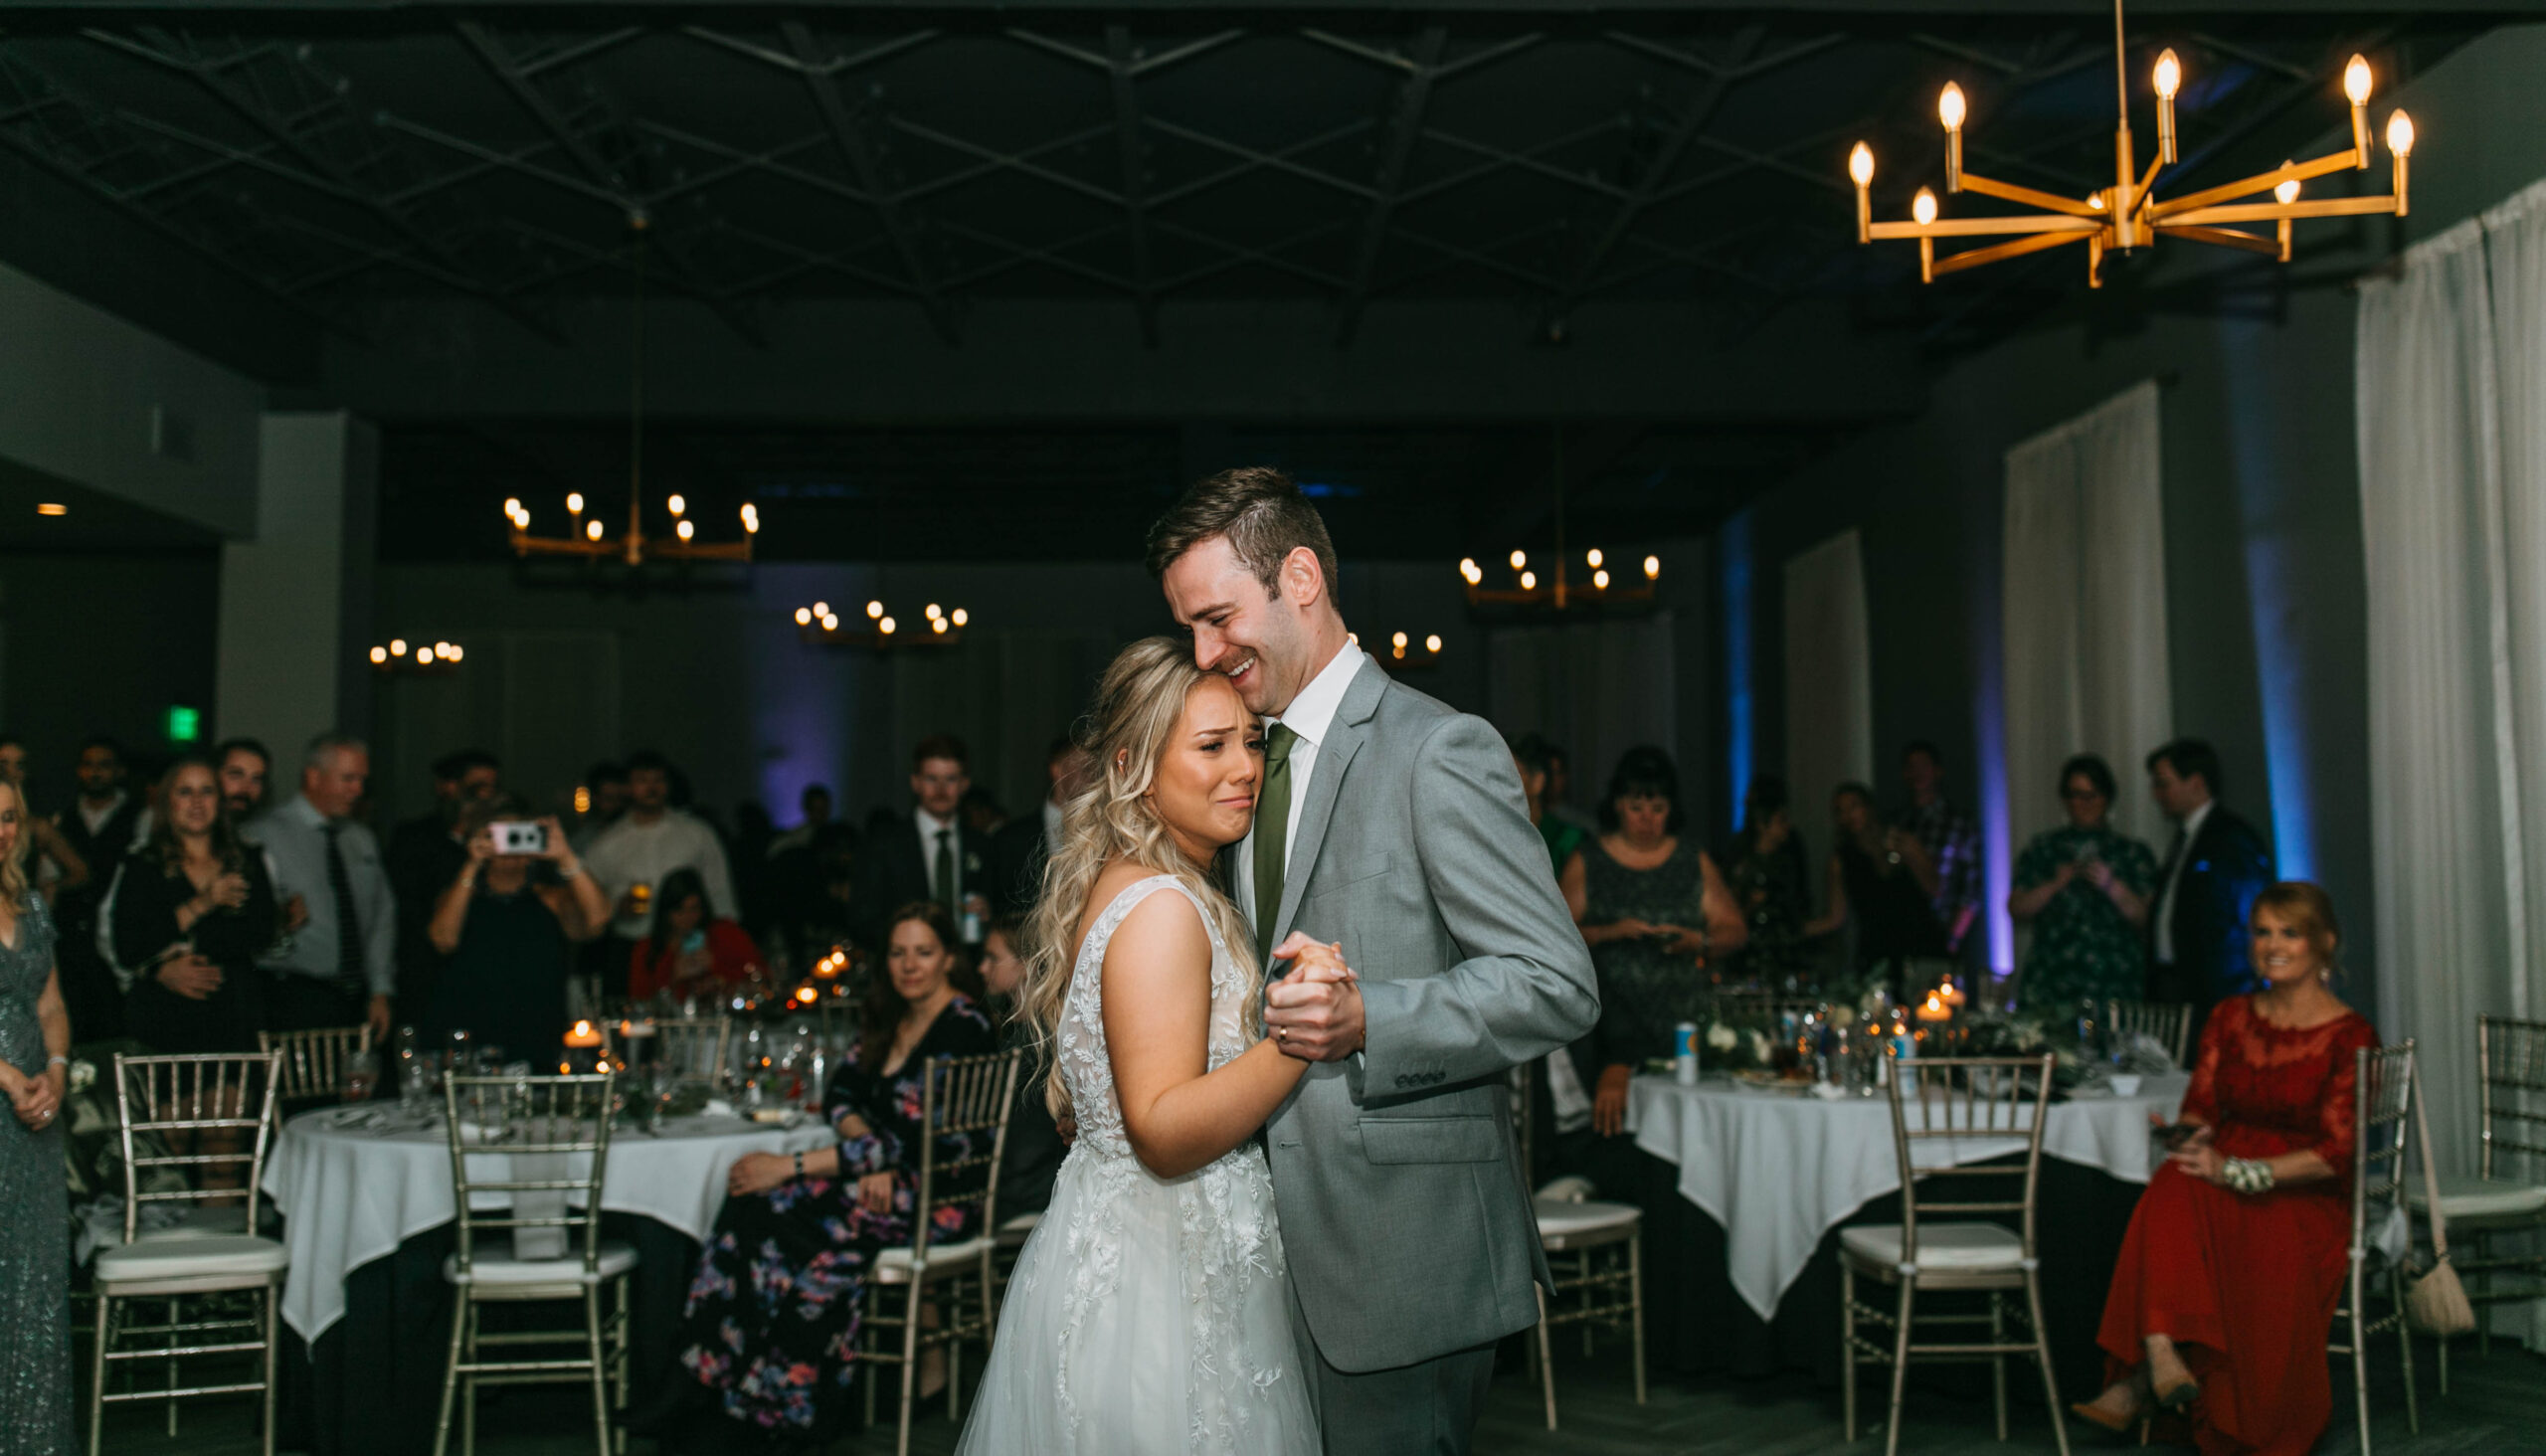 Candid wedding photograph of a couple dancing during their first dance at their hotel wedding reception.